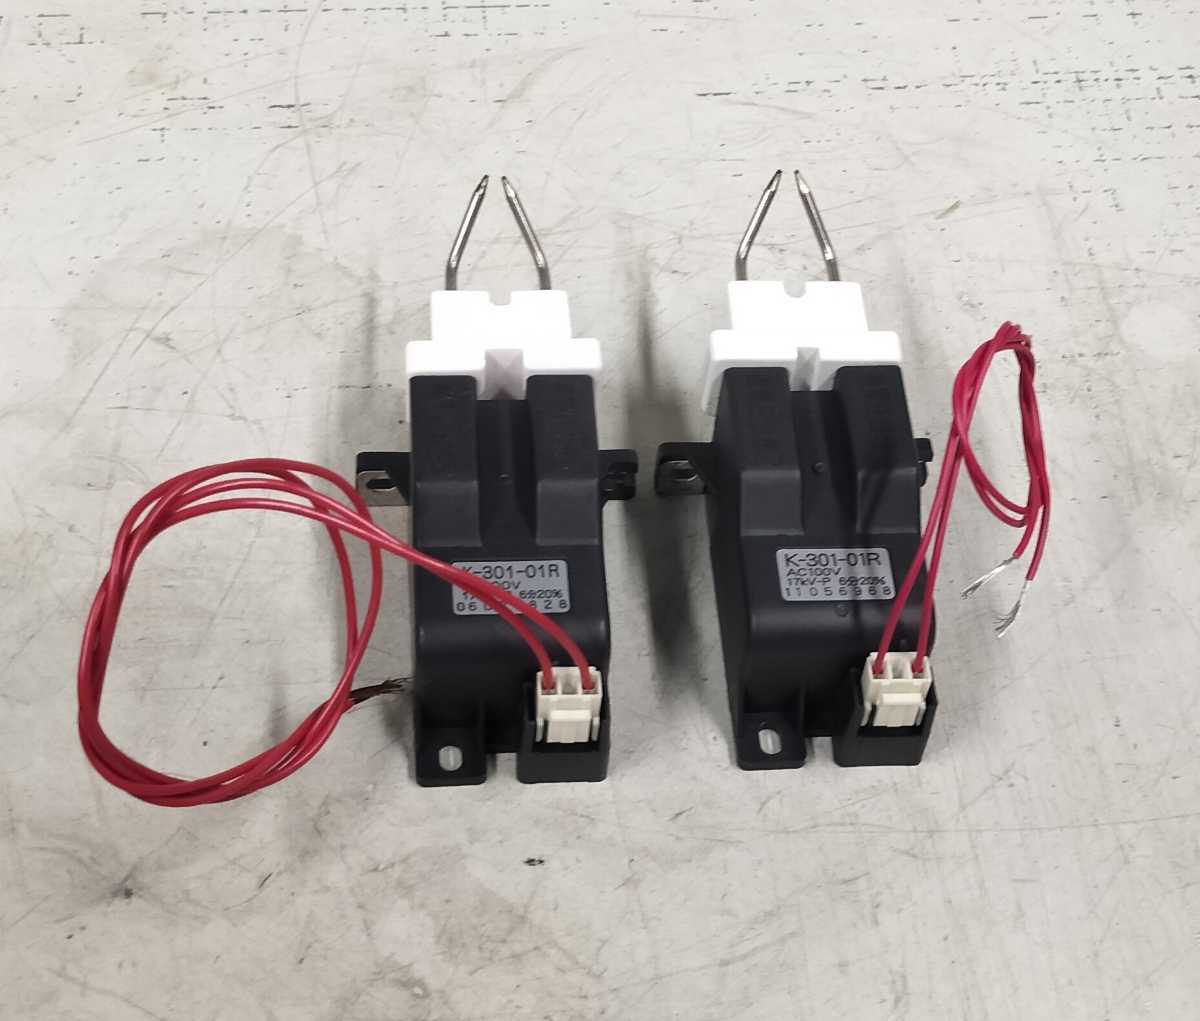 17- length prefecture / ignition trance / igniter /s Parker / height pressure trance /K-301-01R/AC100v/ operation excellent / profitable 2 piece set / used parts 